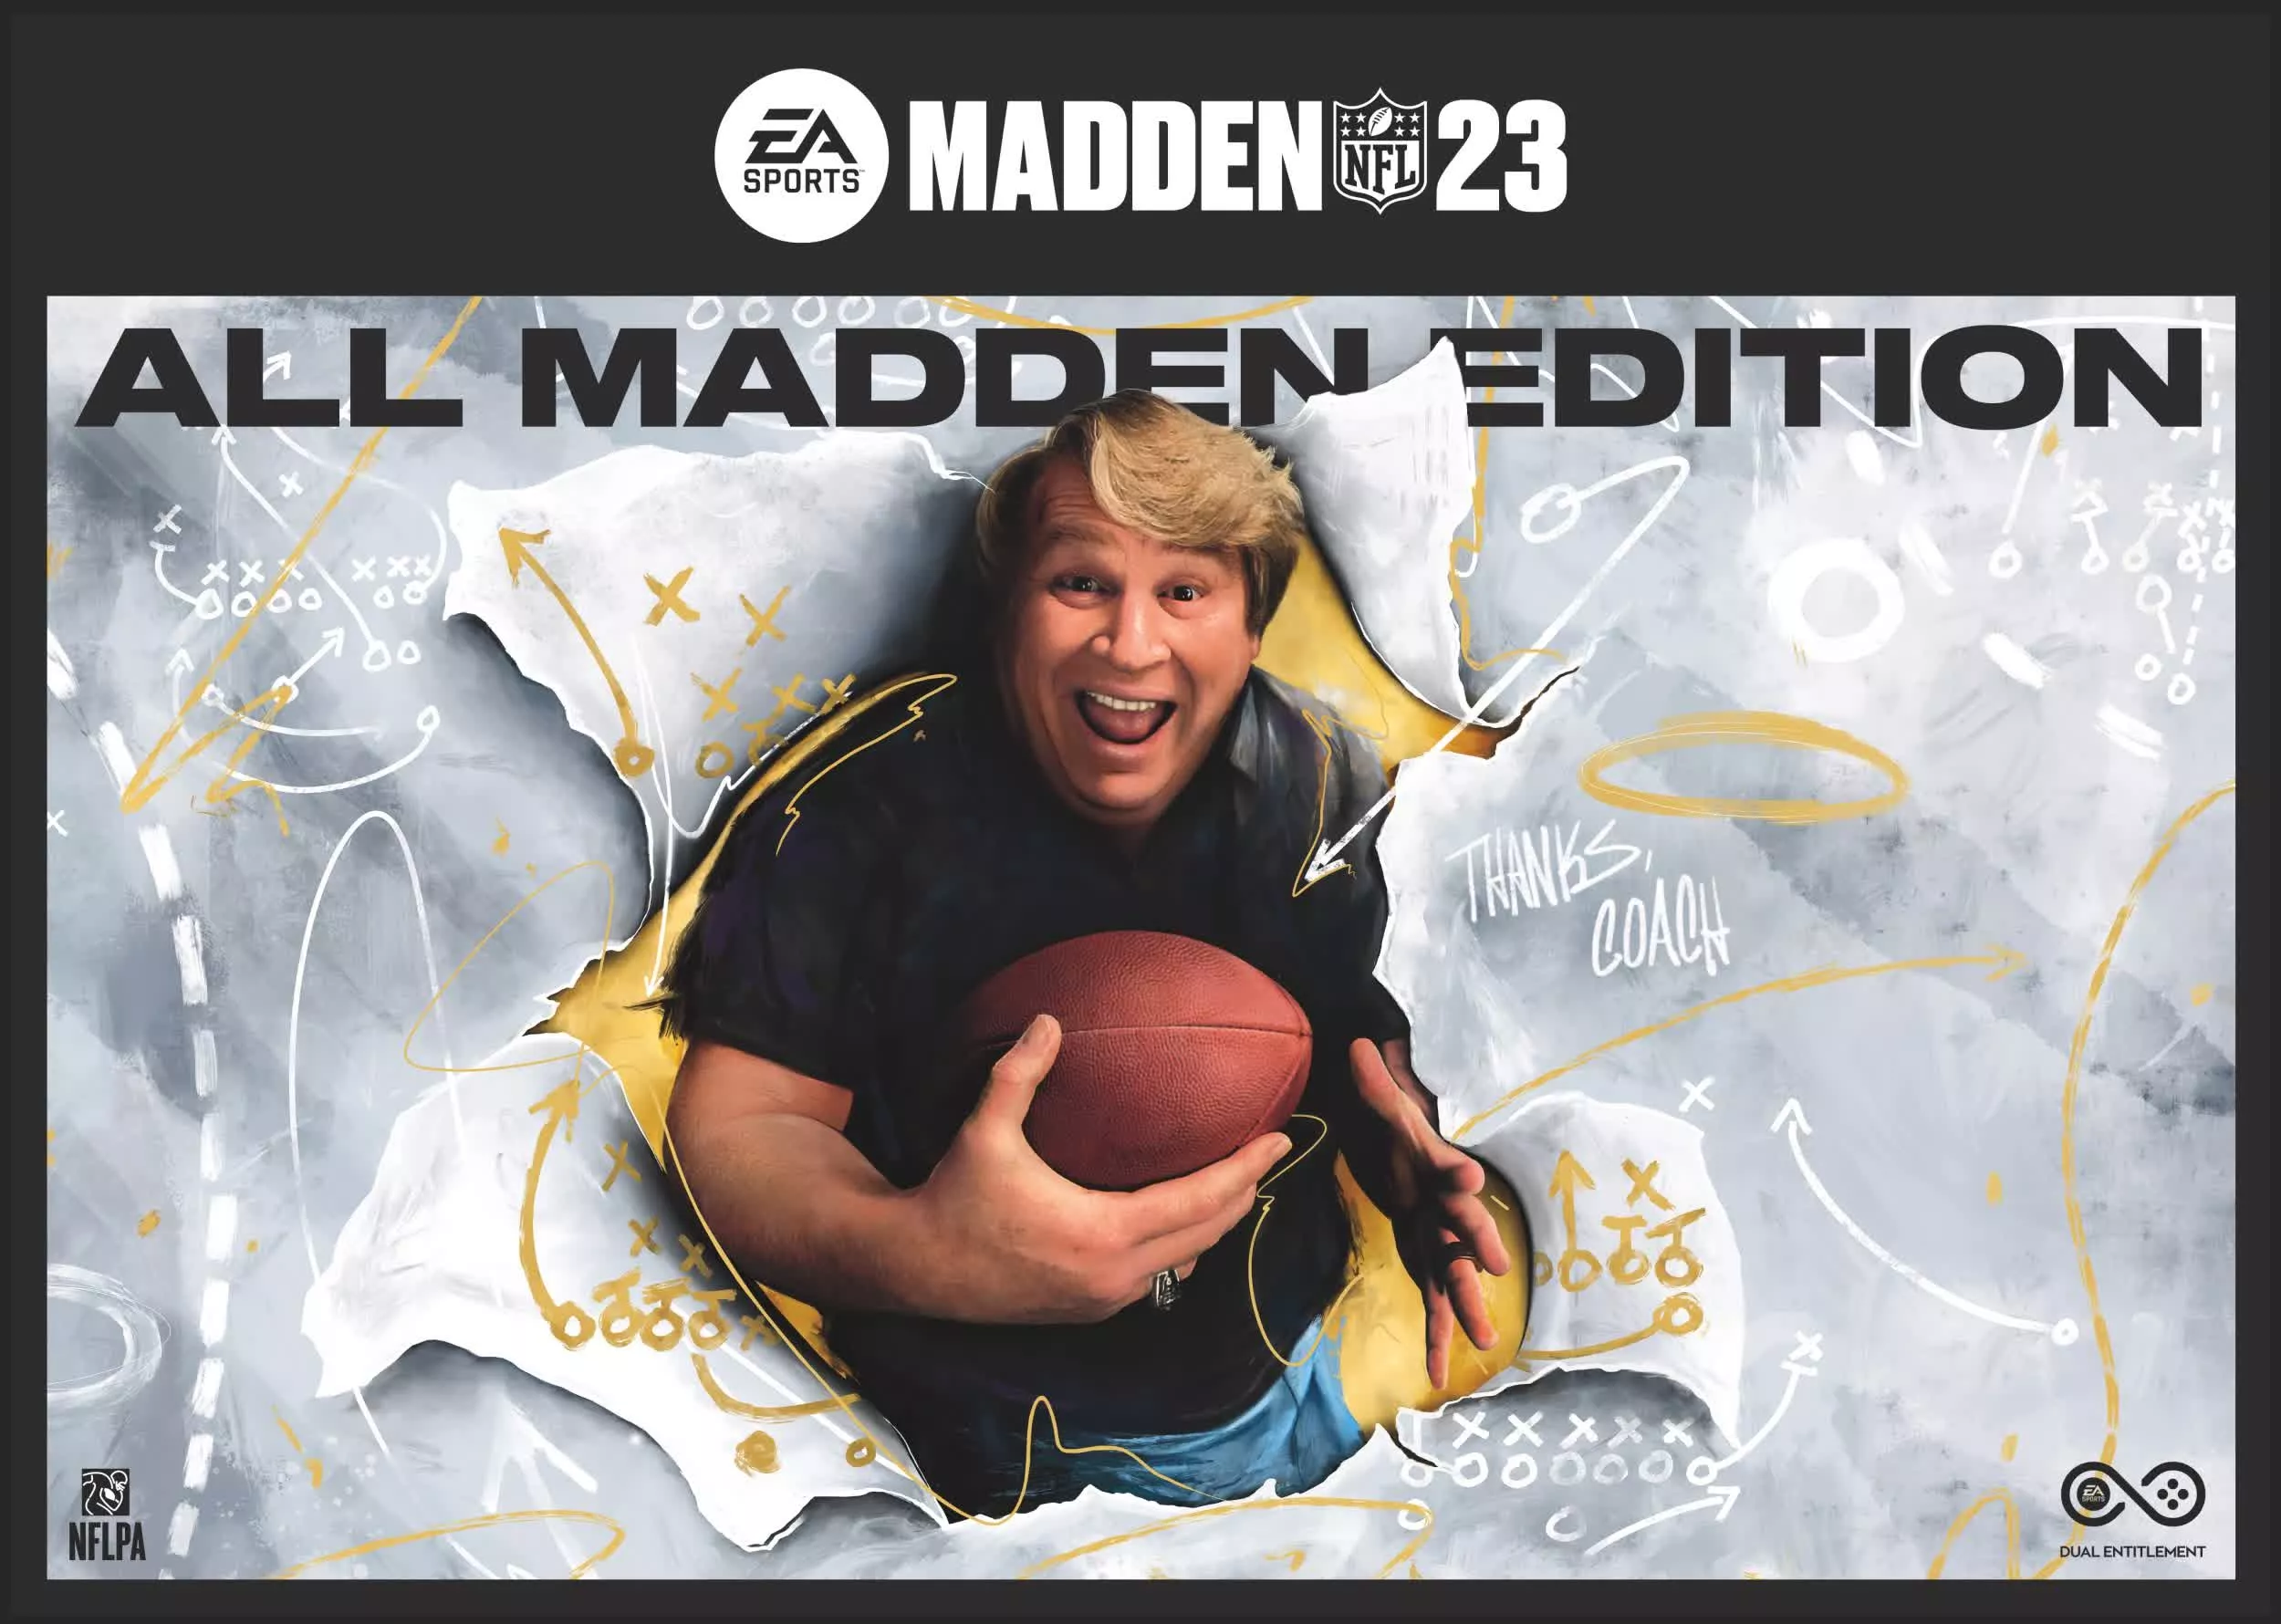 Madden NFL 23 gameplay changes, cover photo, pre-order details and more revealed